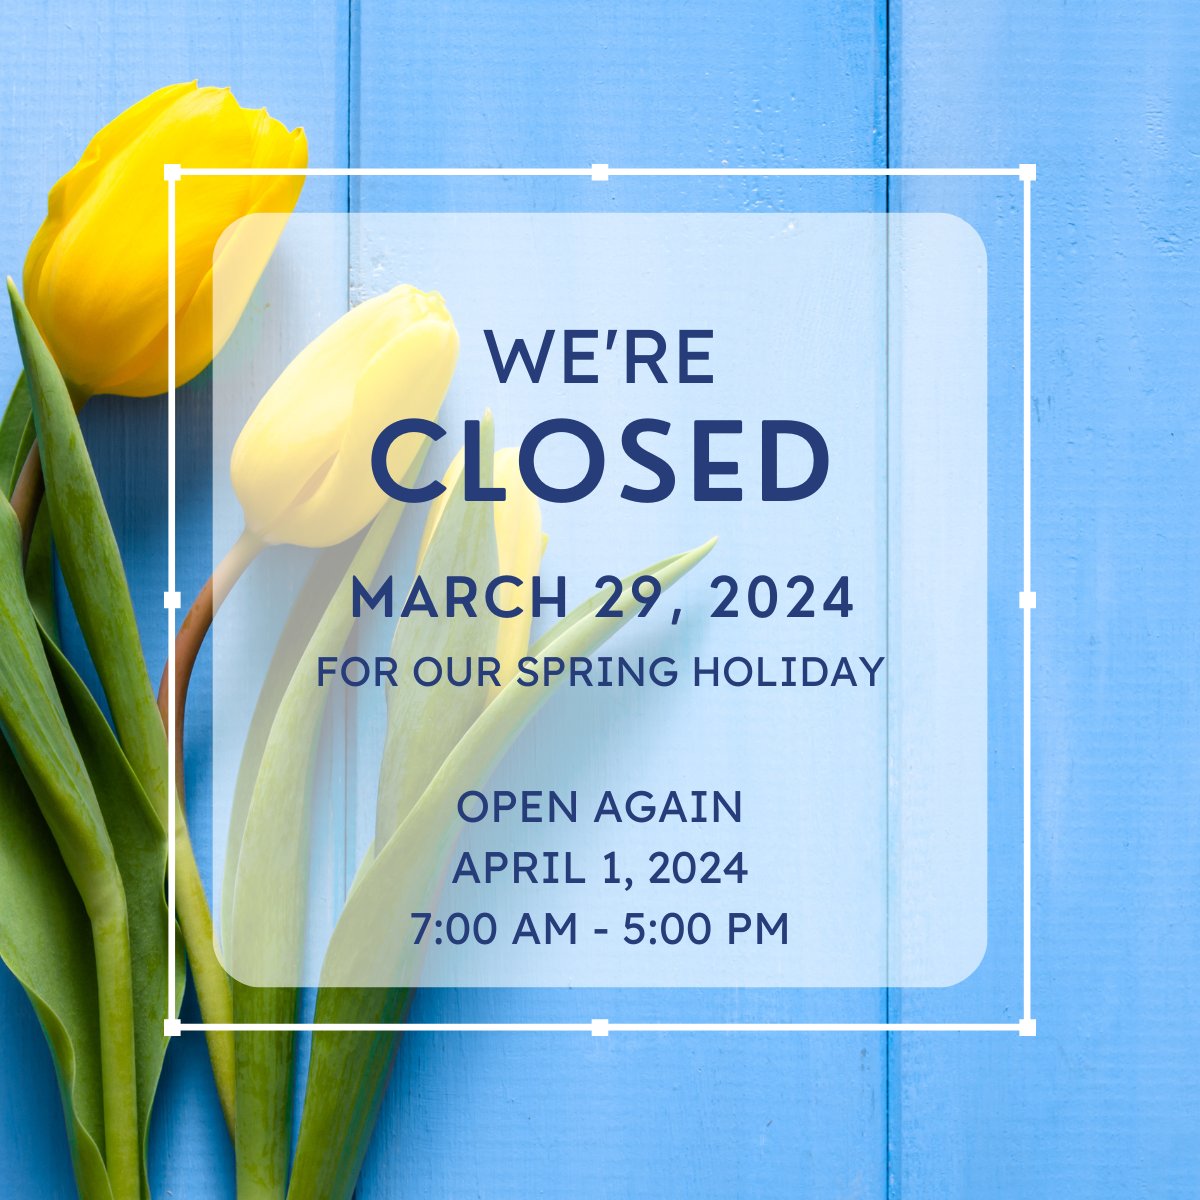 Air-Weigh will be closed for our Spring Holiday on March 29, 2024. We will resume regular business hours on Monday, April 1, 2024.